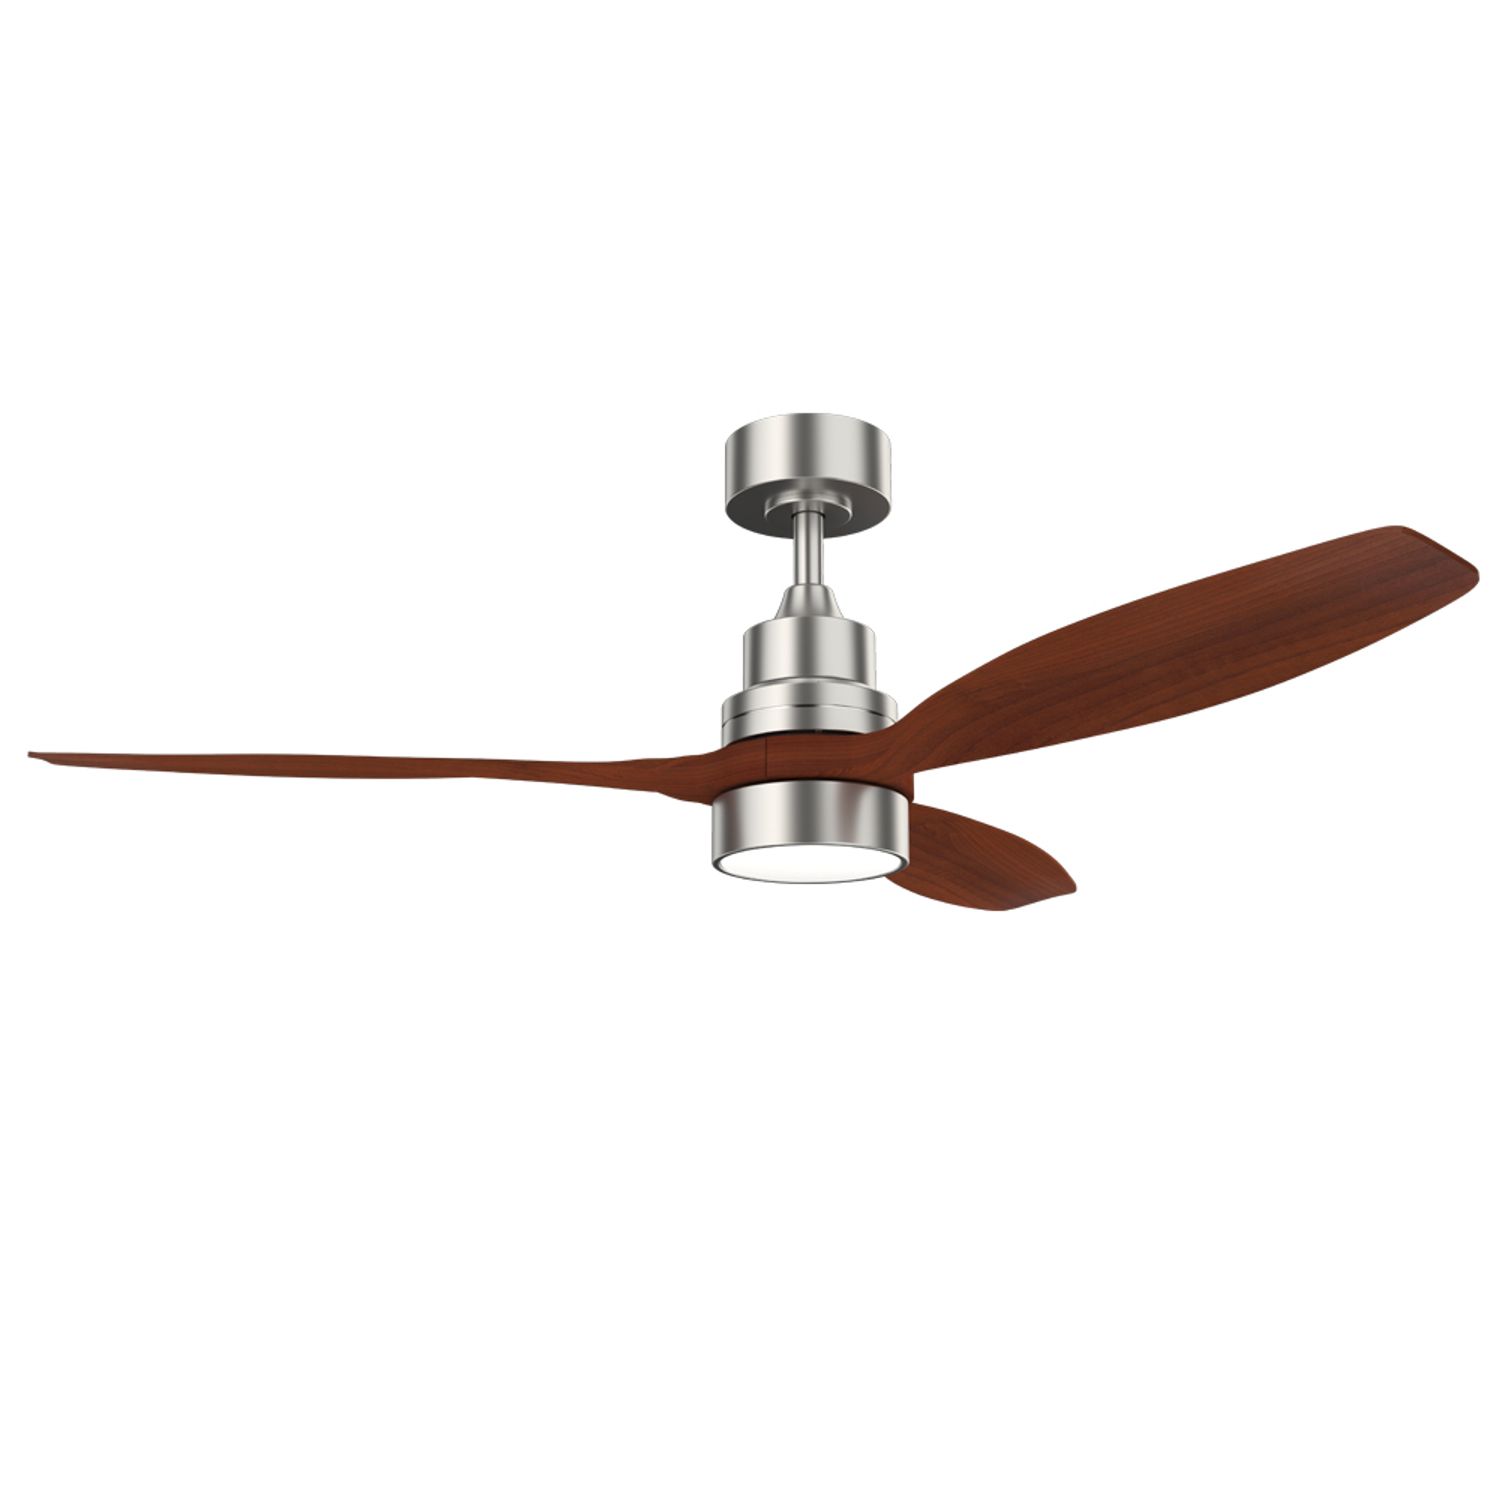 KBS silver and wood modern ceiling fan with light and remote